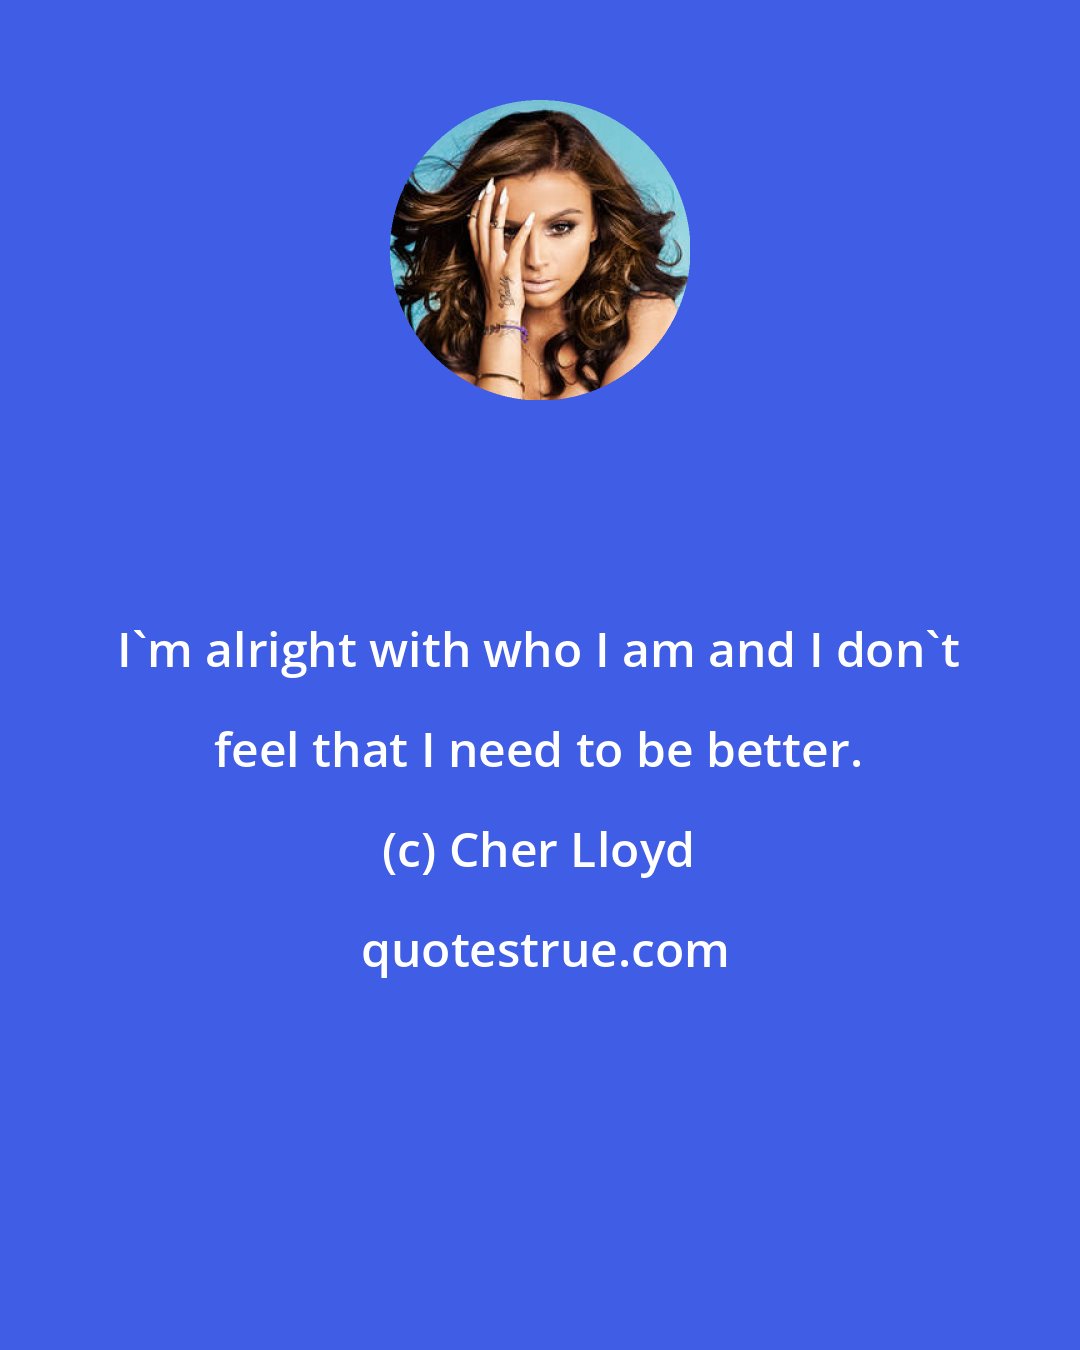 Cher Lloyd: I'm alright with who I am and I don't feel that I need to be better.